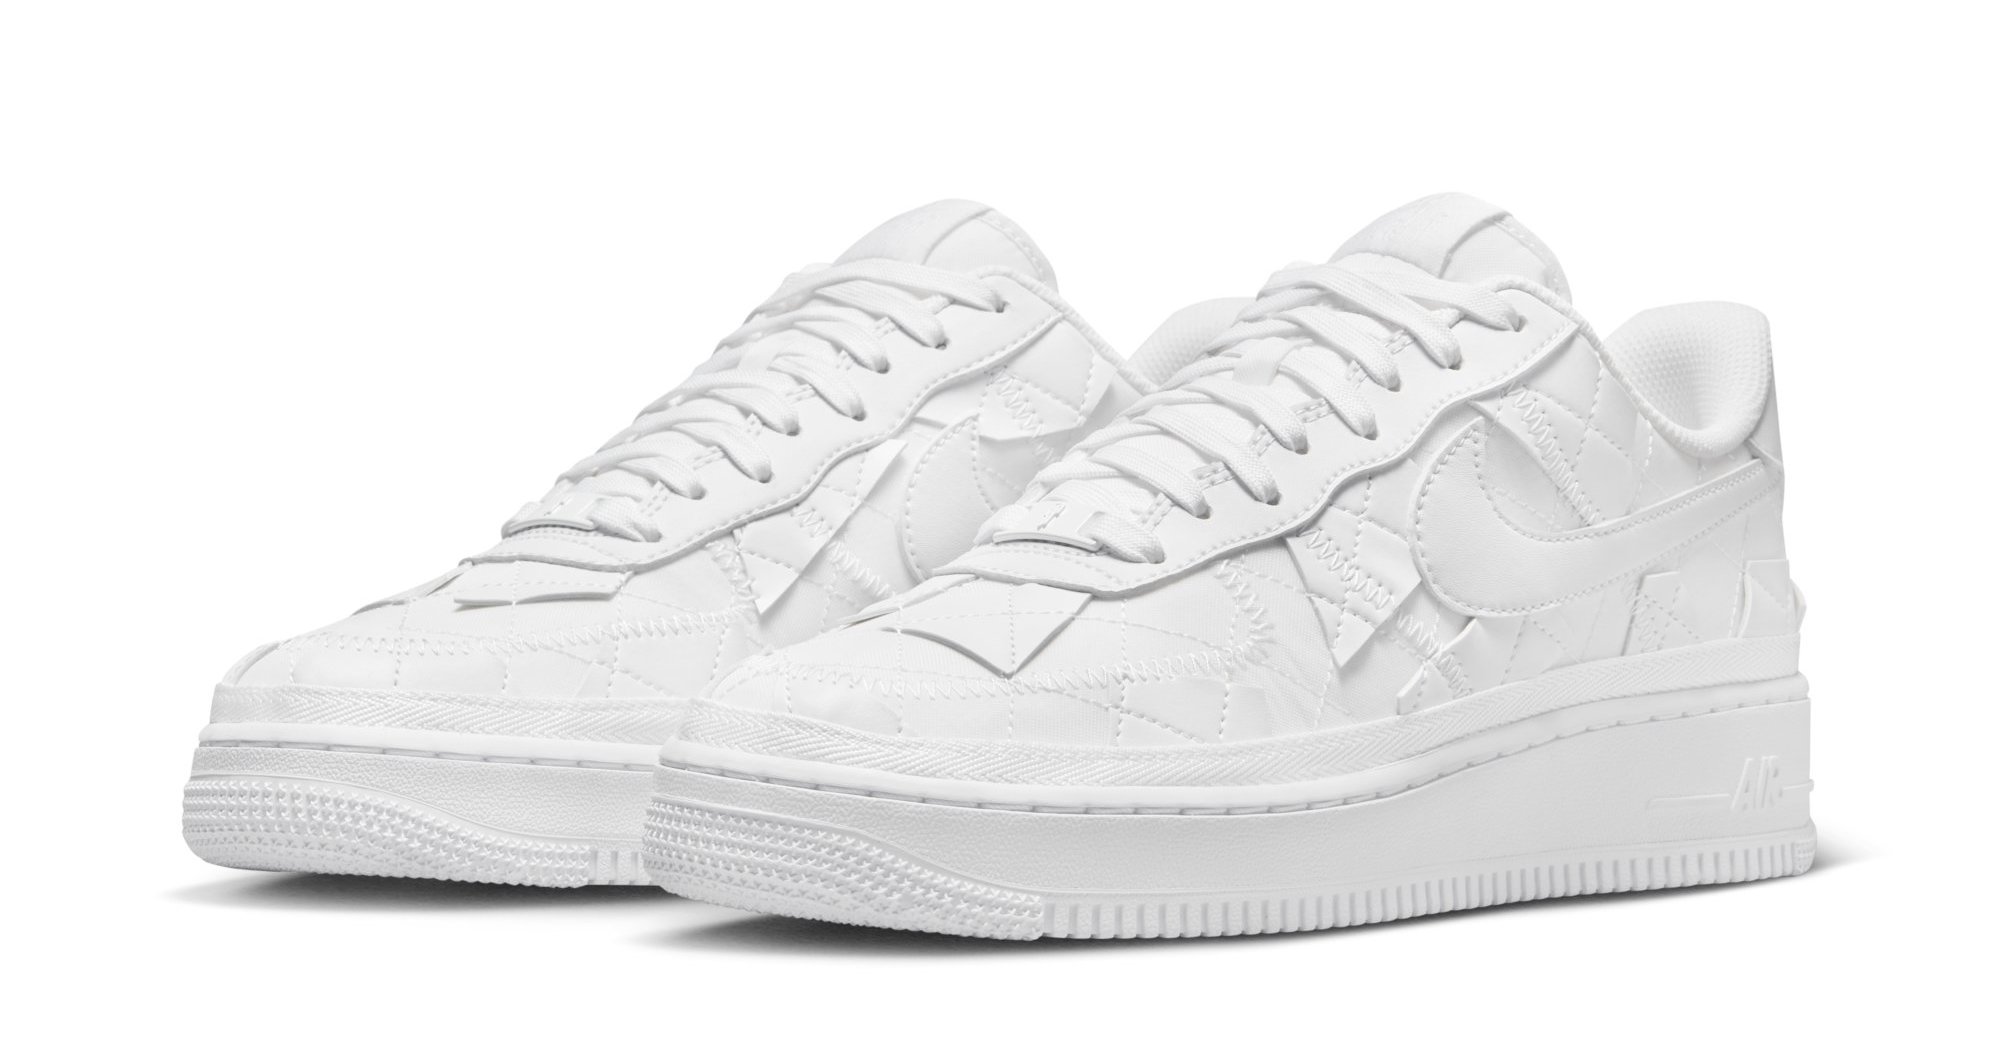 White-on-White Billie Eilish x Nike Air Force 1 Low Releases This